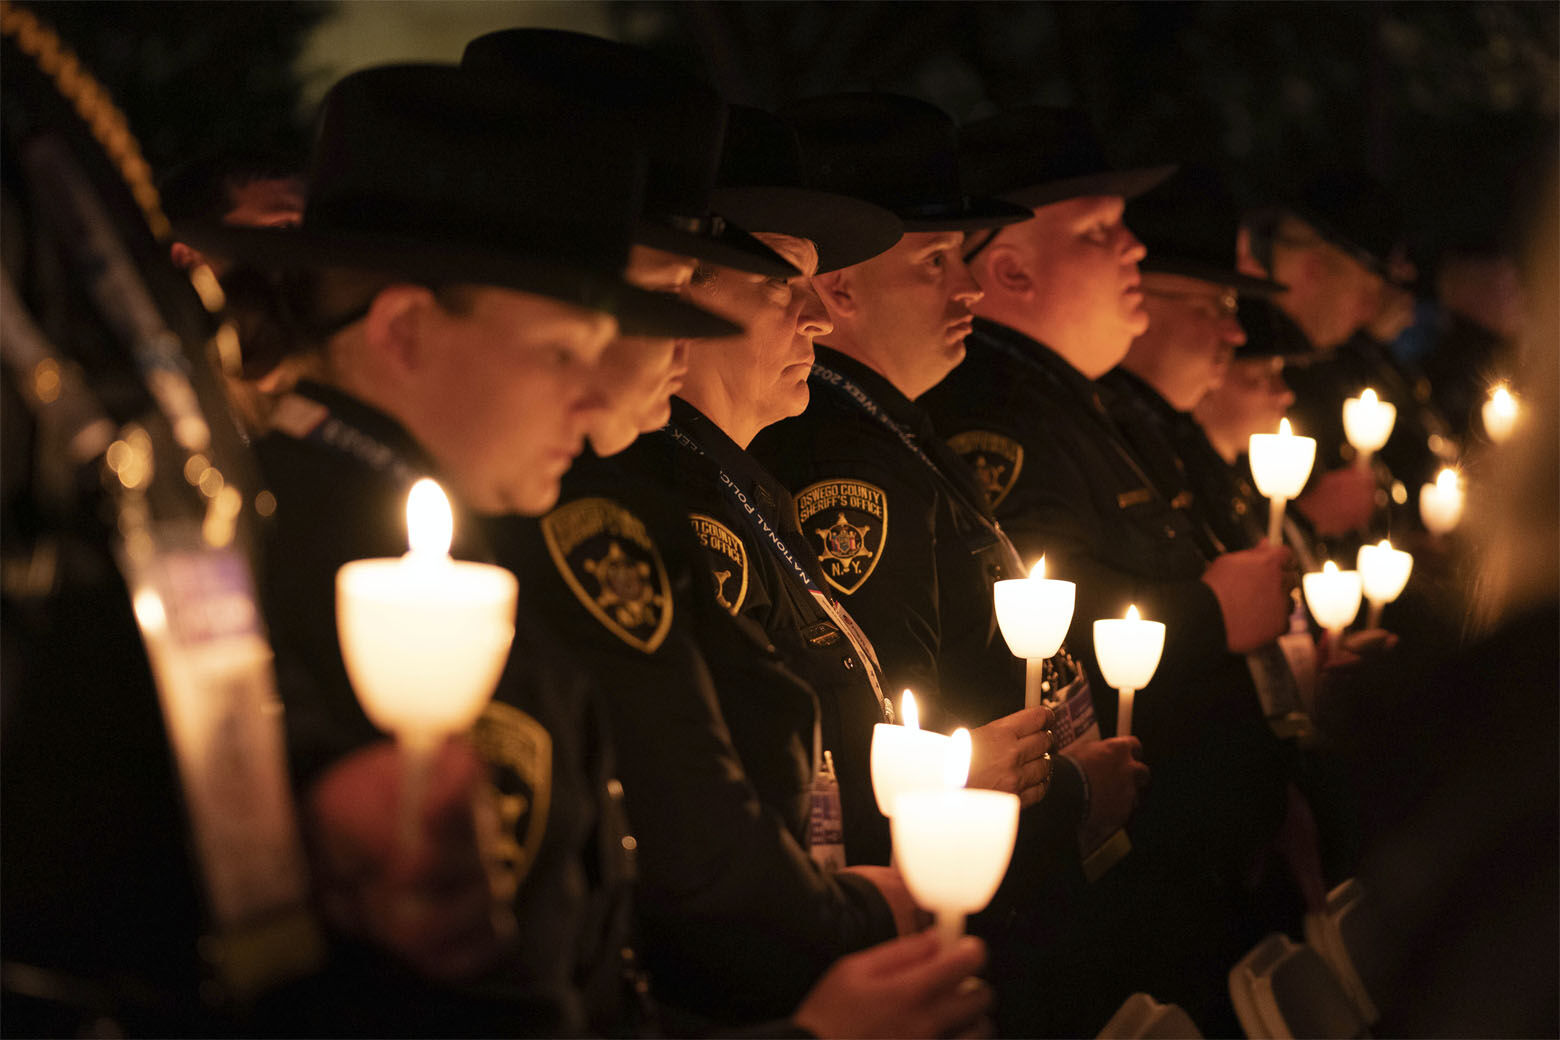 PHOTOS Candlelight vigil on National Mall honors fallen officers